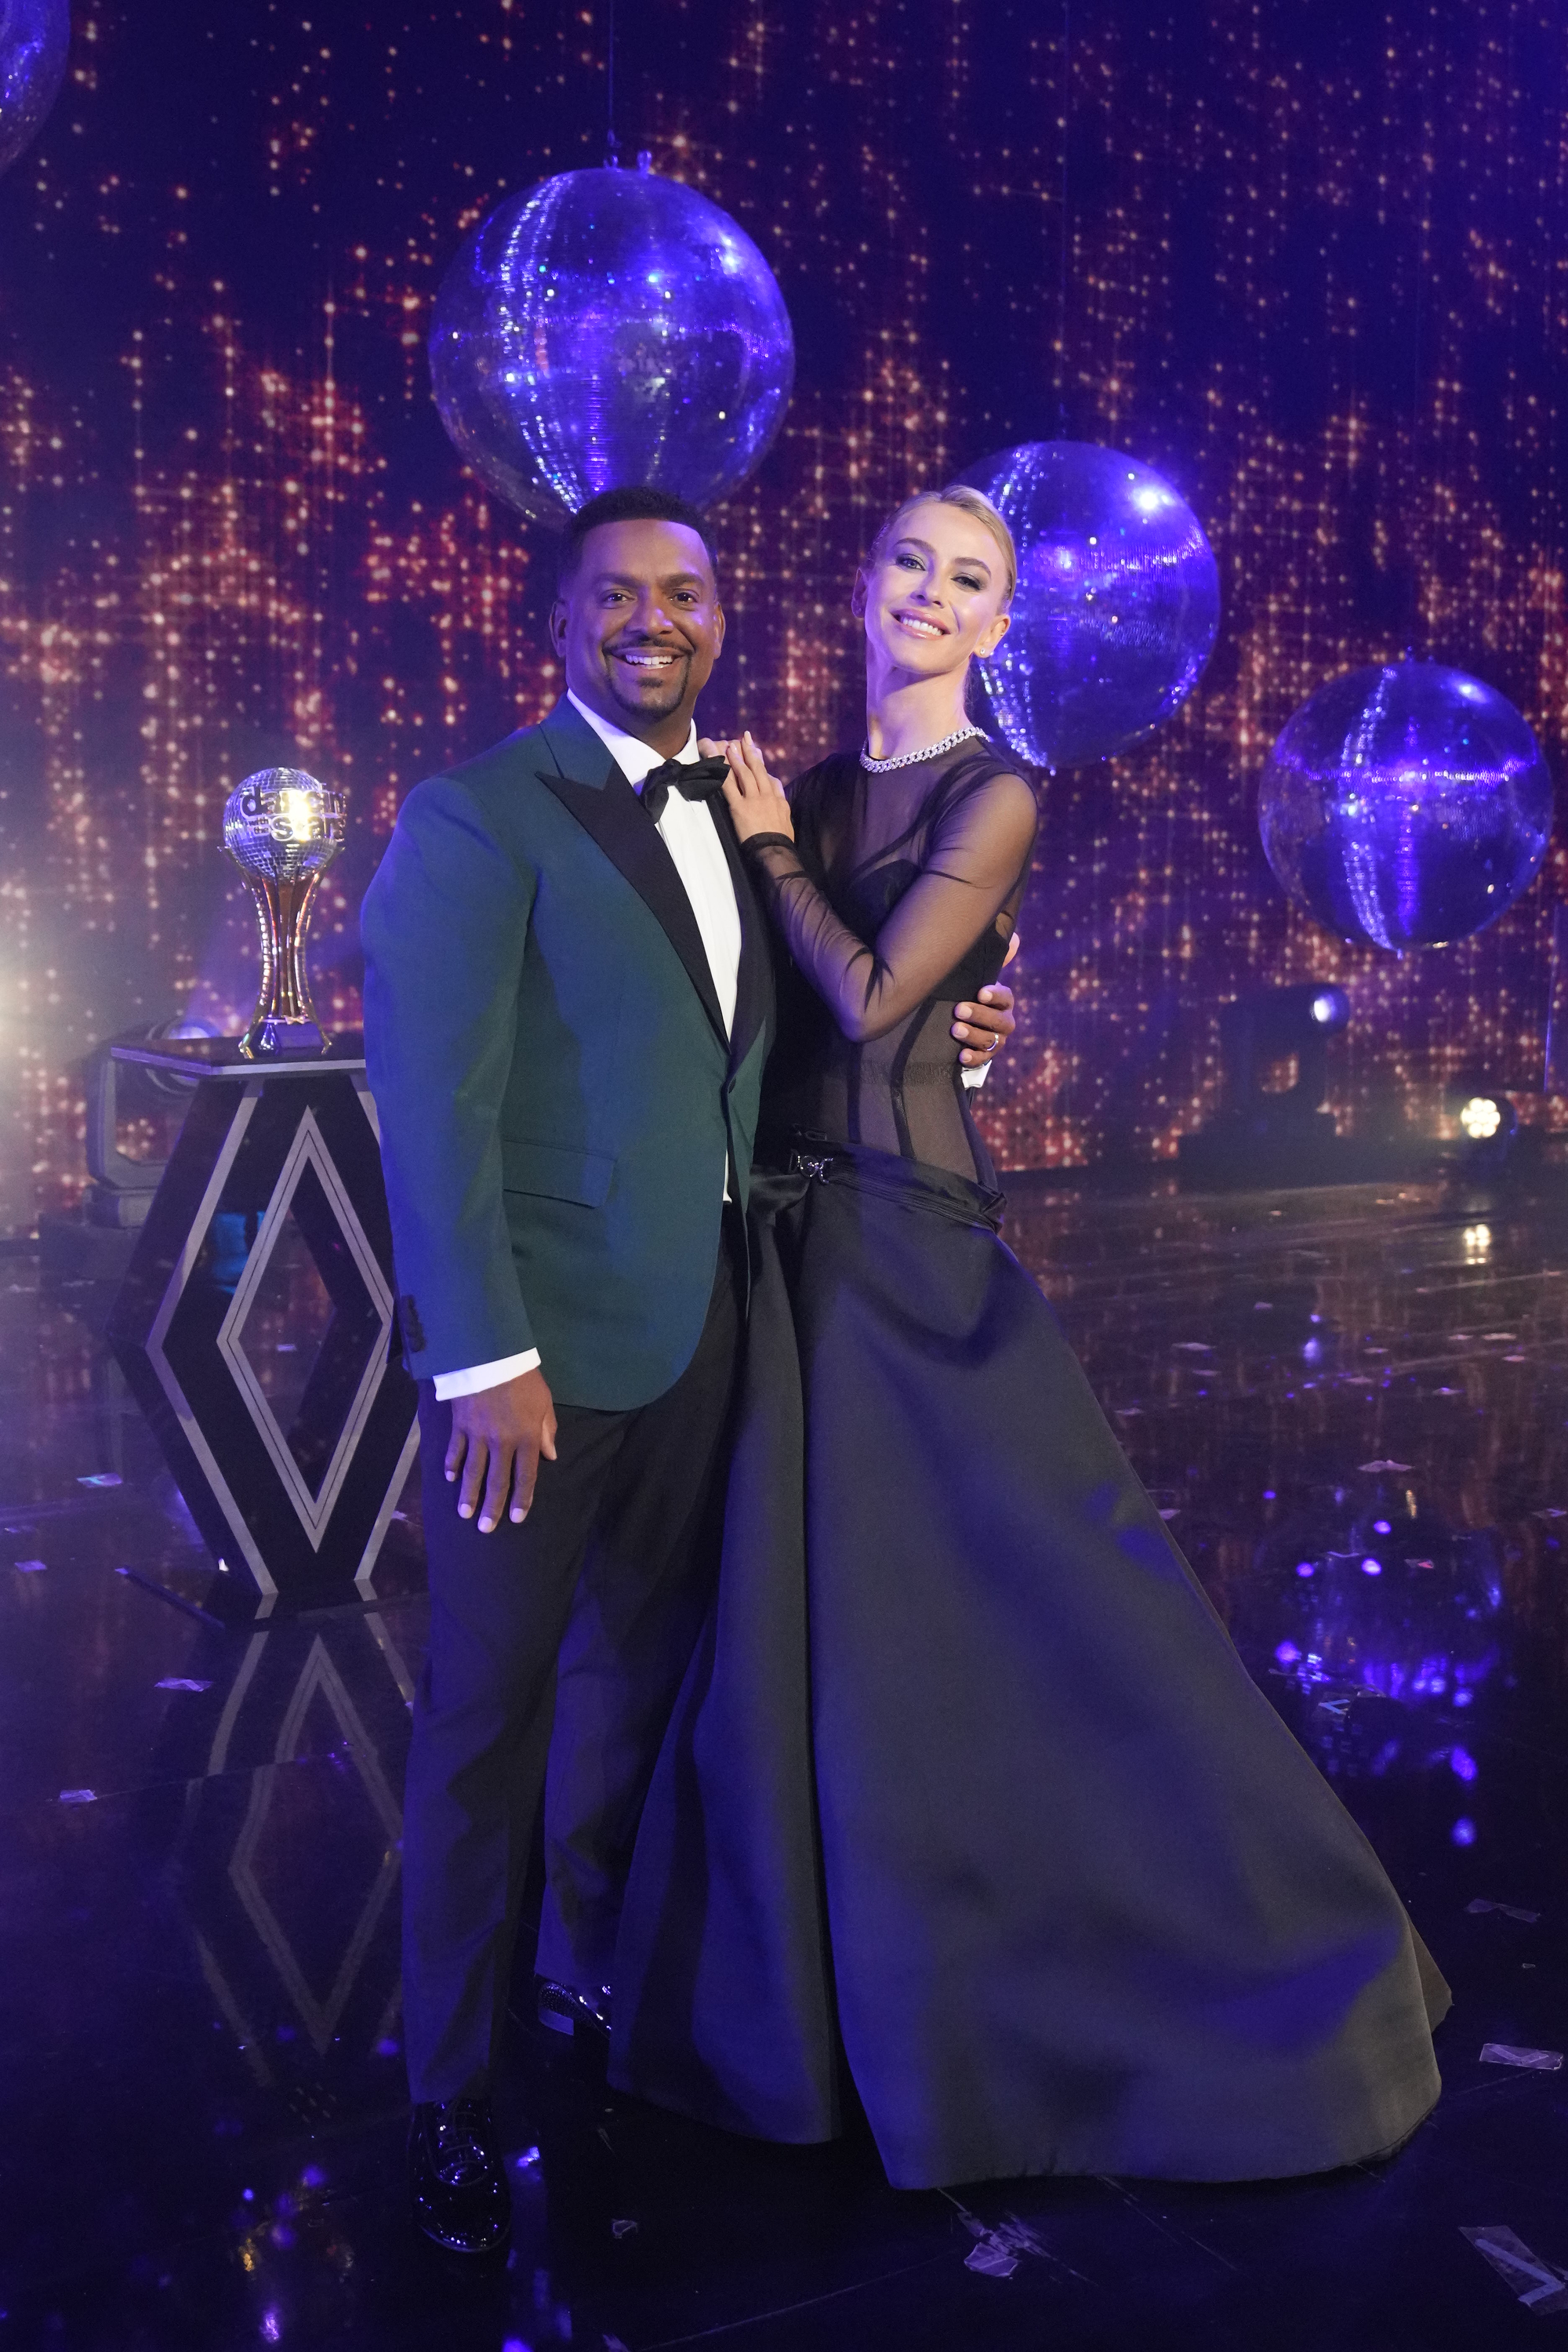 Julianne, pictured here with Dancing with the Stars co-host Alfonso Ribeiro, recently gushed over the Versace dress she wore during the show's season finale